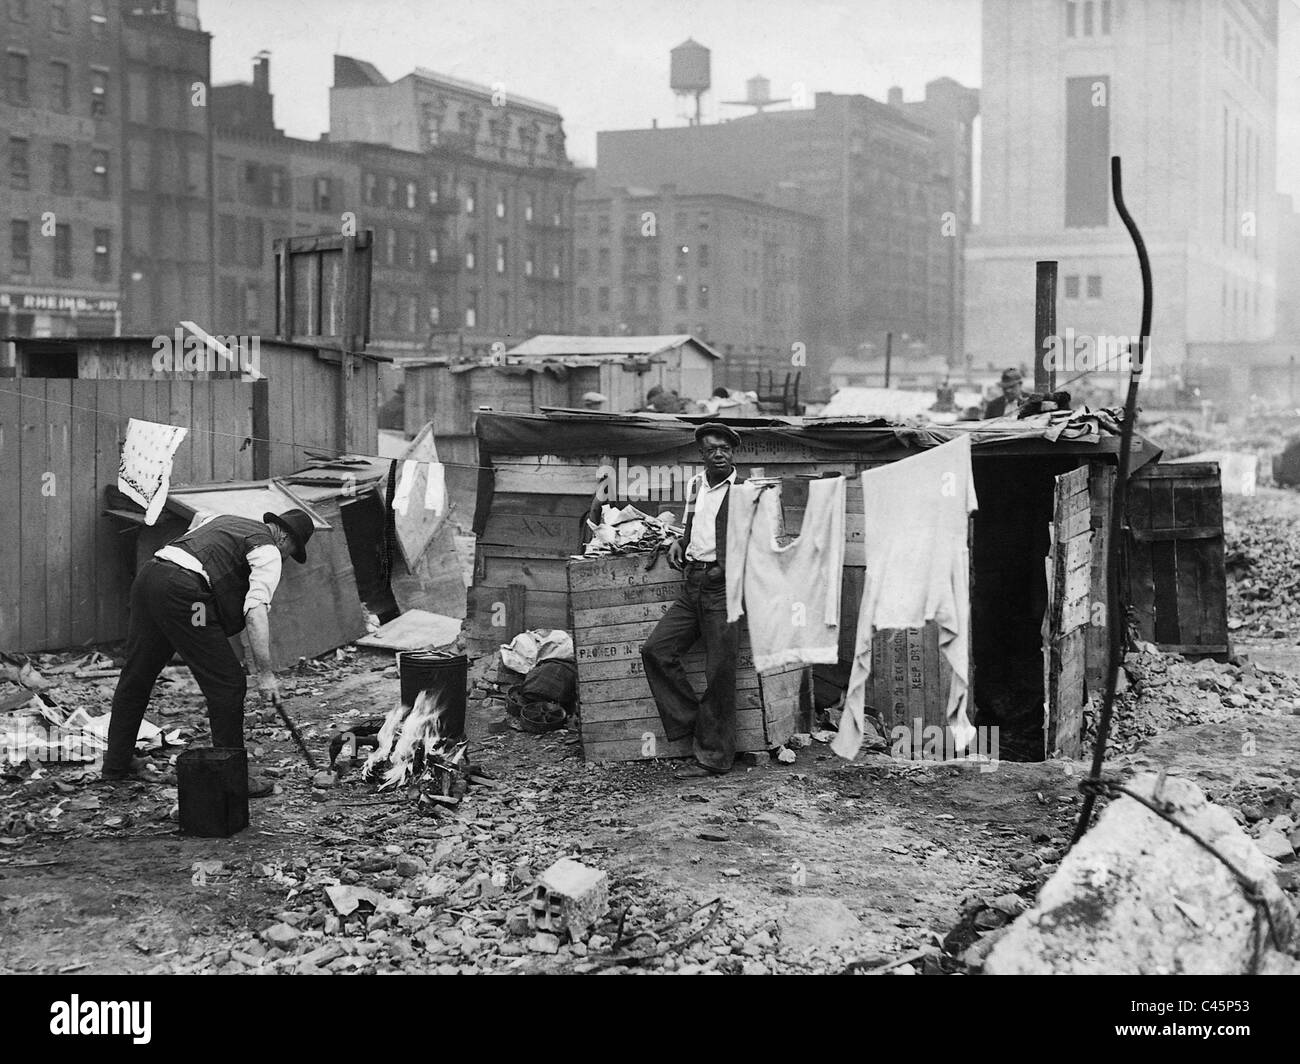 Washing place in a New York slum during the Great Depression, 1931 Stock Photo